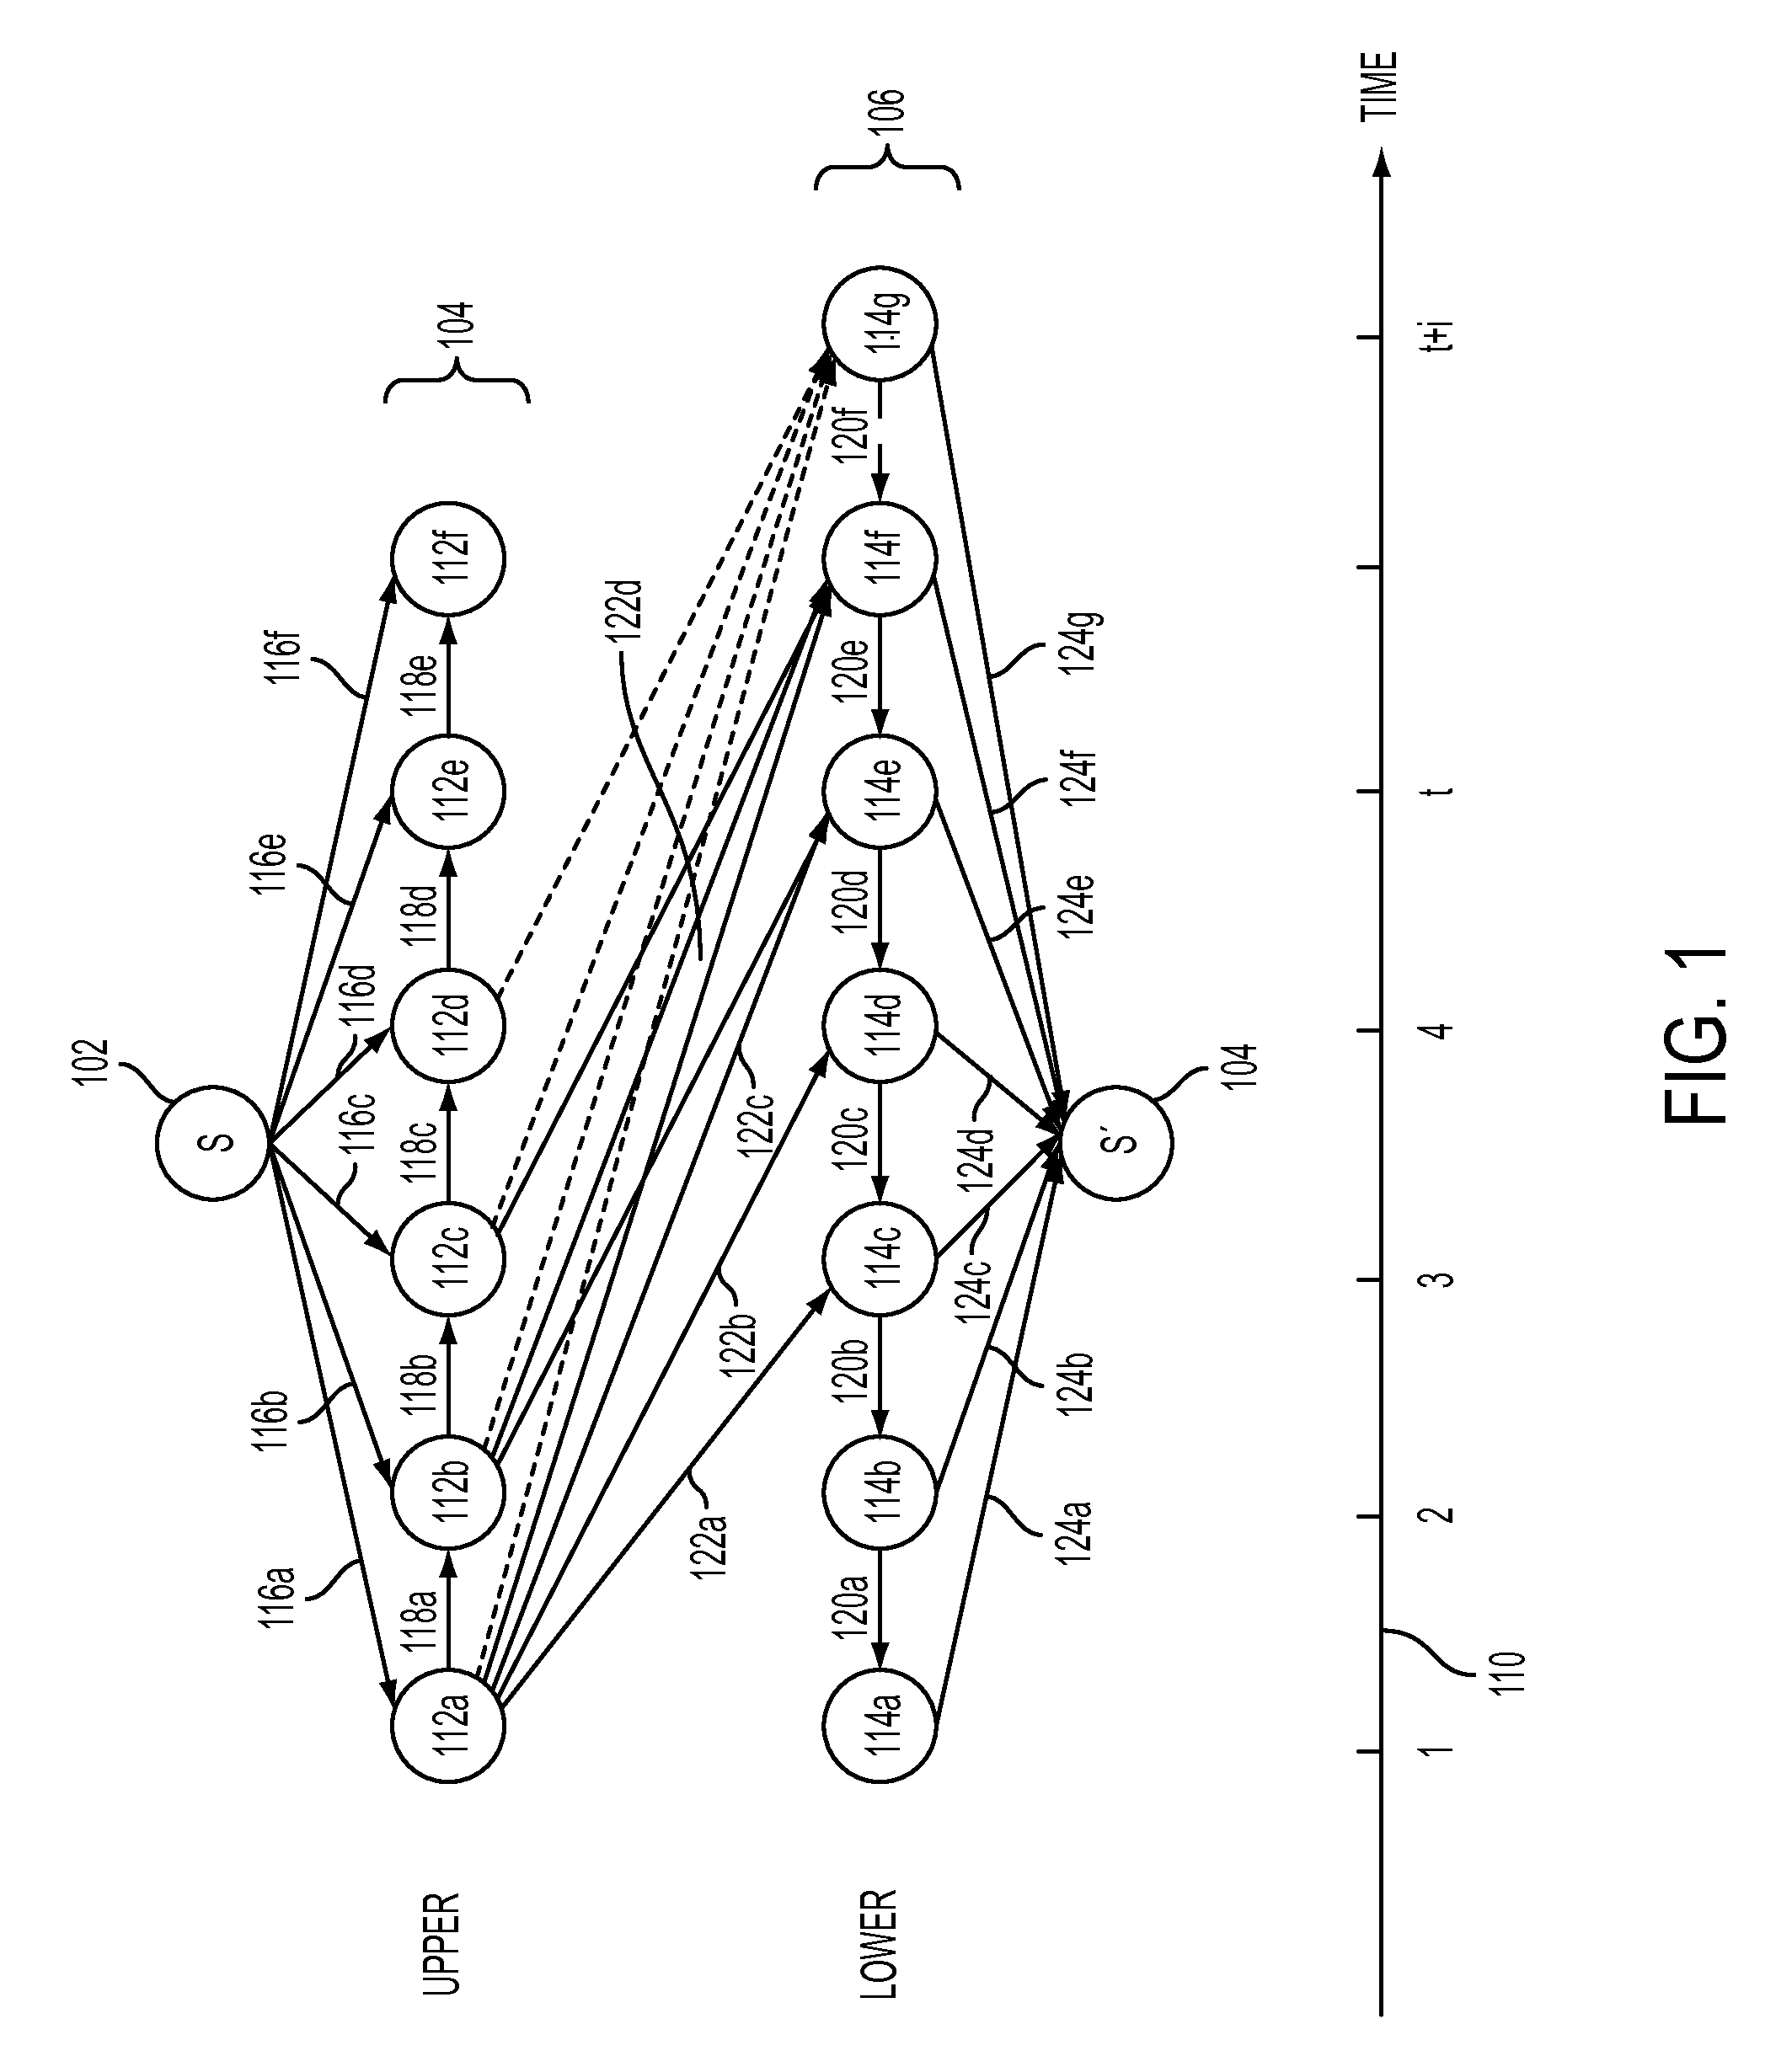 Dynamic vehicle routing in multi-stage distribution networks